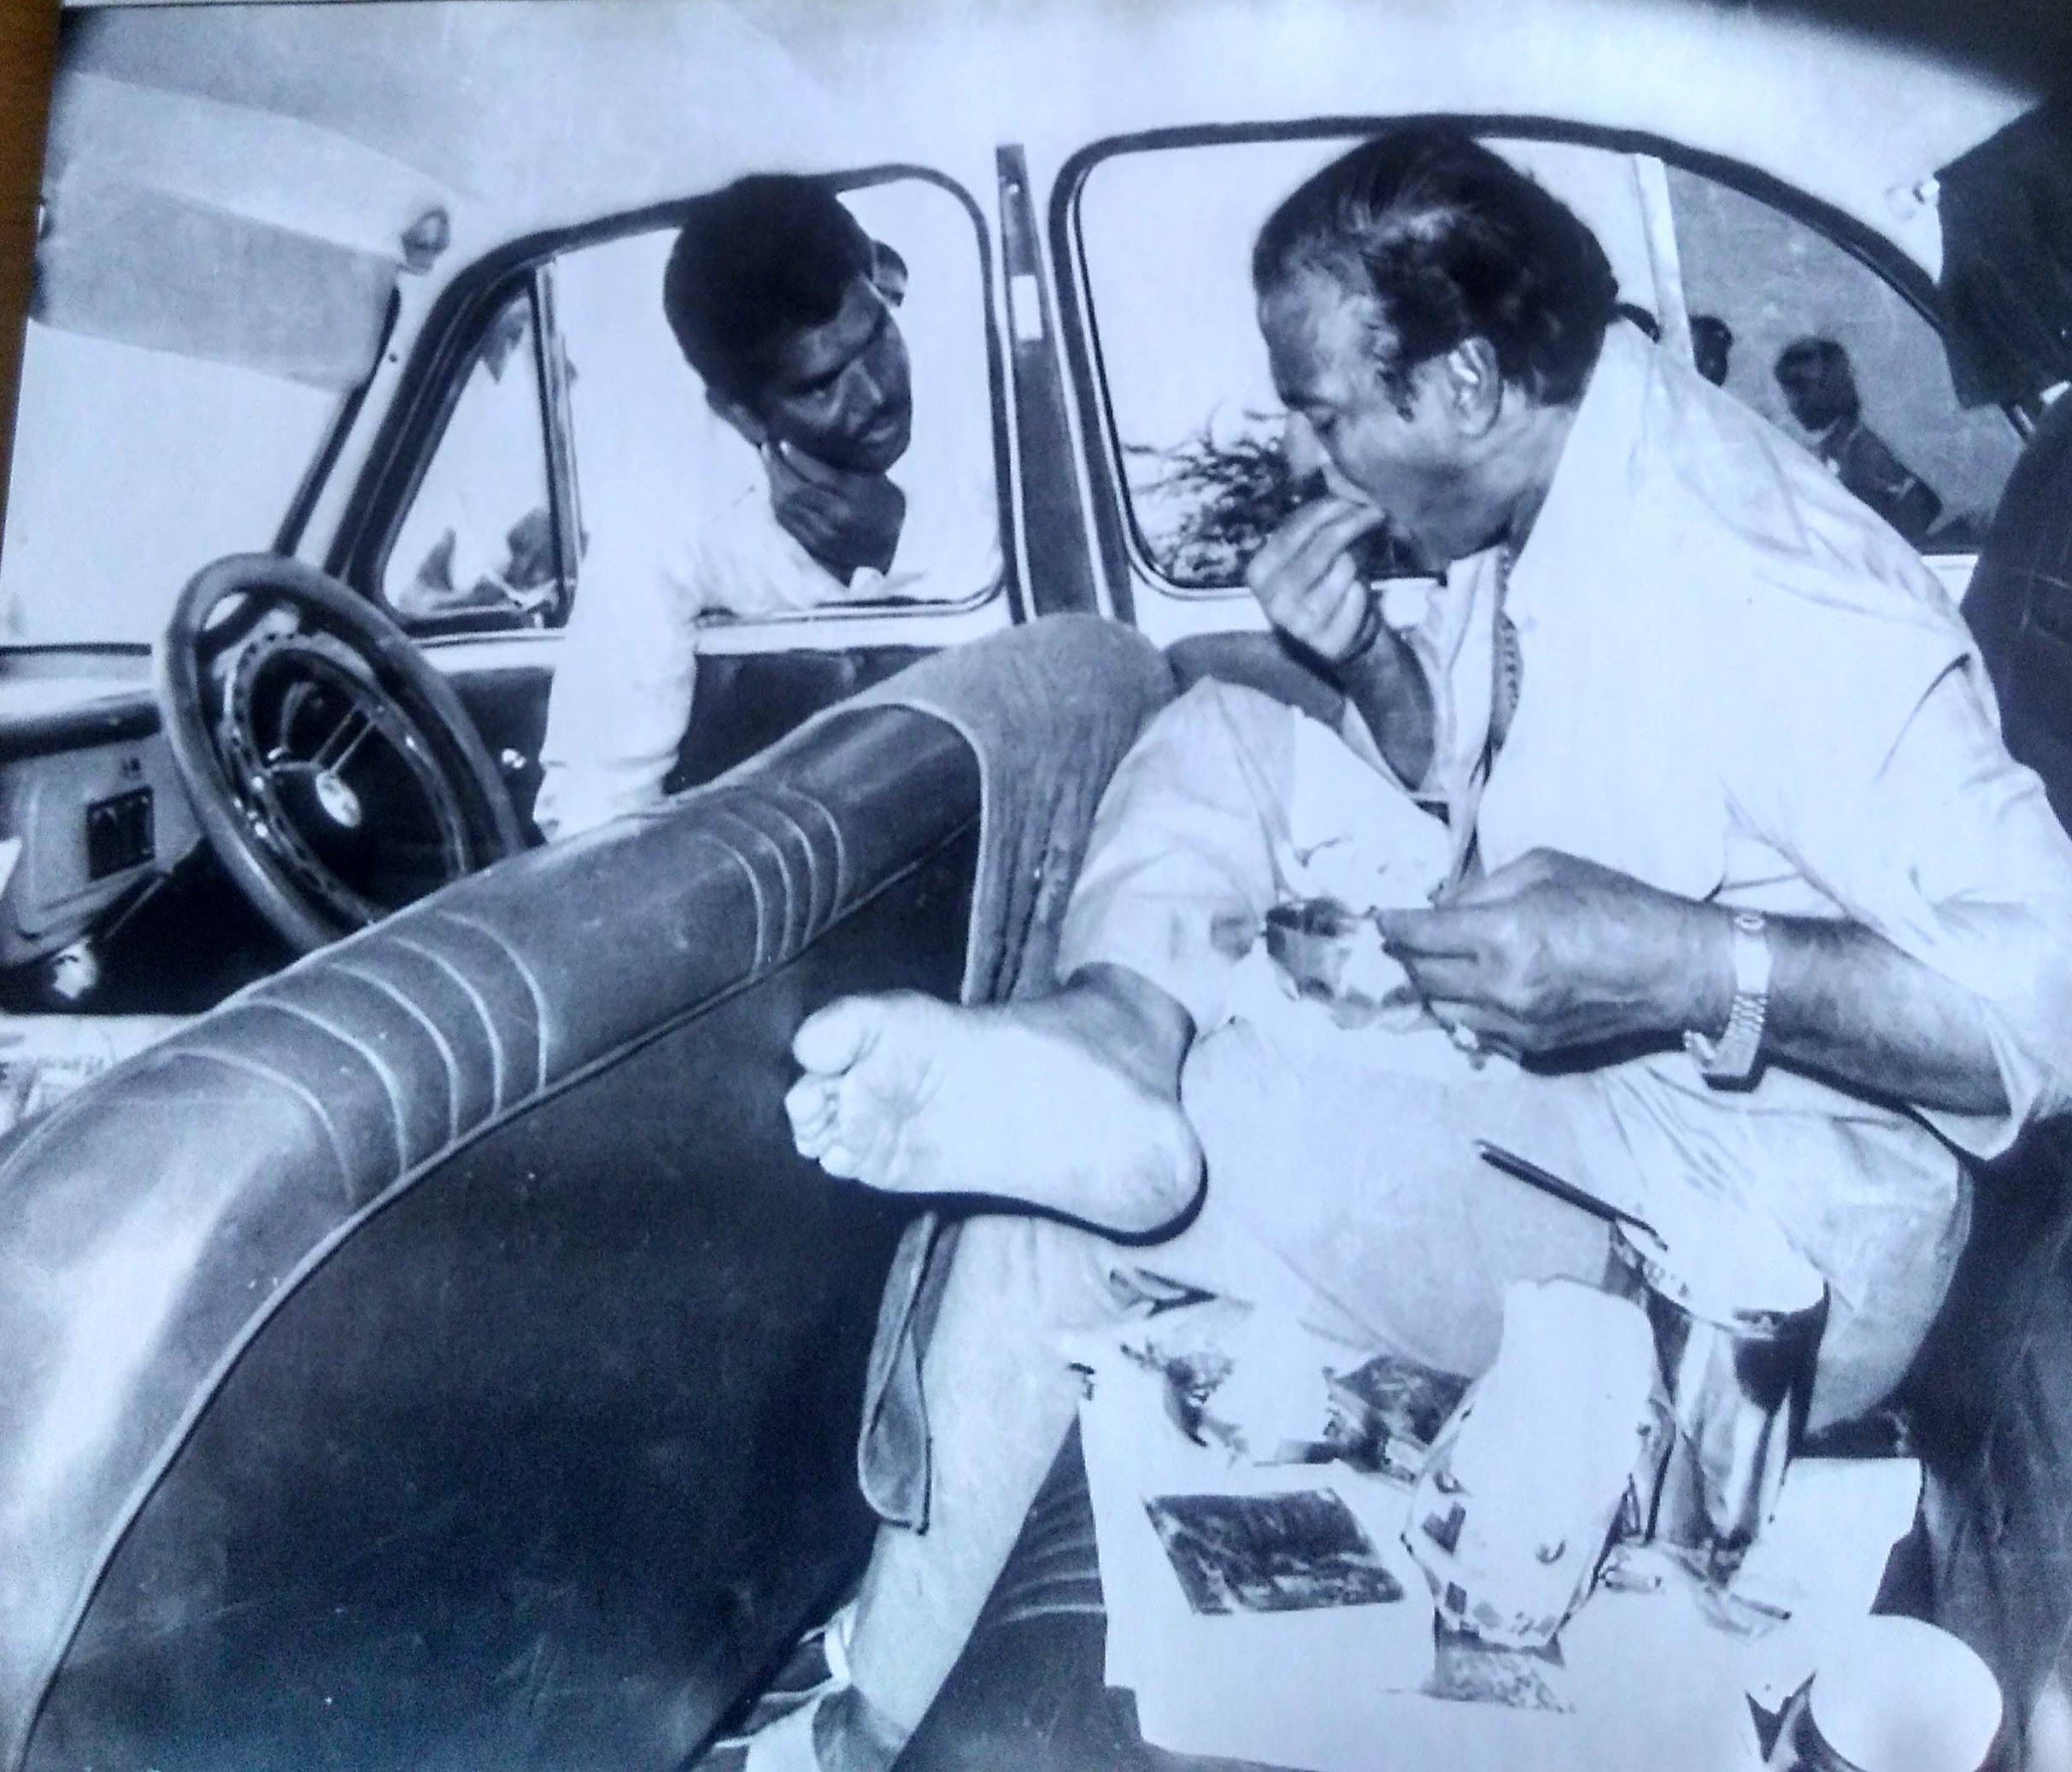 NTR during his political hustings